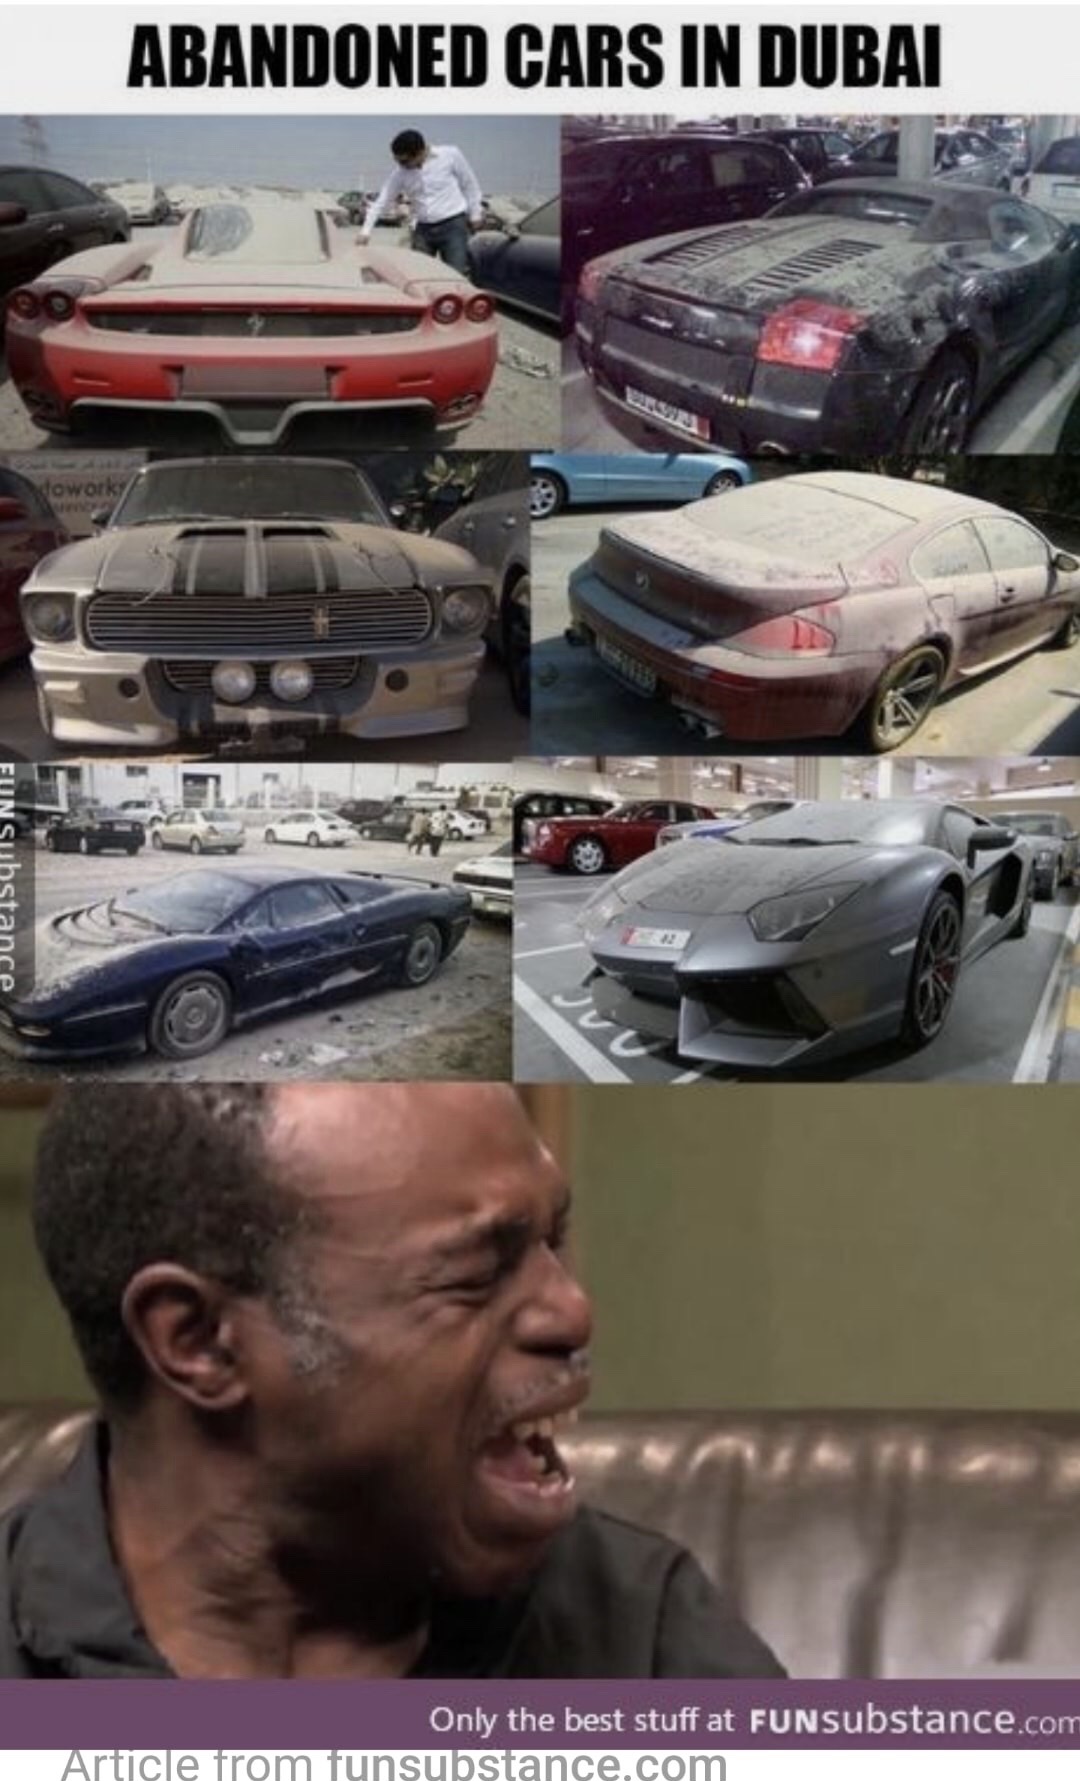 abandoned cars in dubai meme - Abandoned Cars In Dubai dowork Fun Substance Only the best stuff at Fun Substance.com Article from funsubstance.com